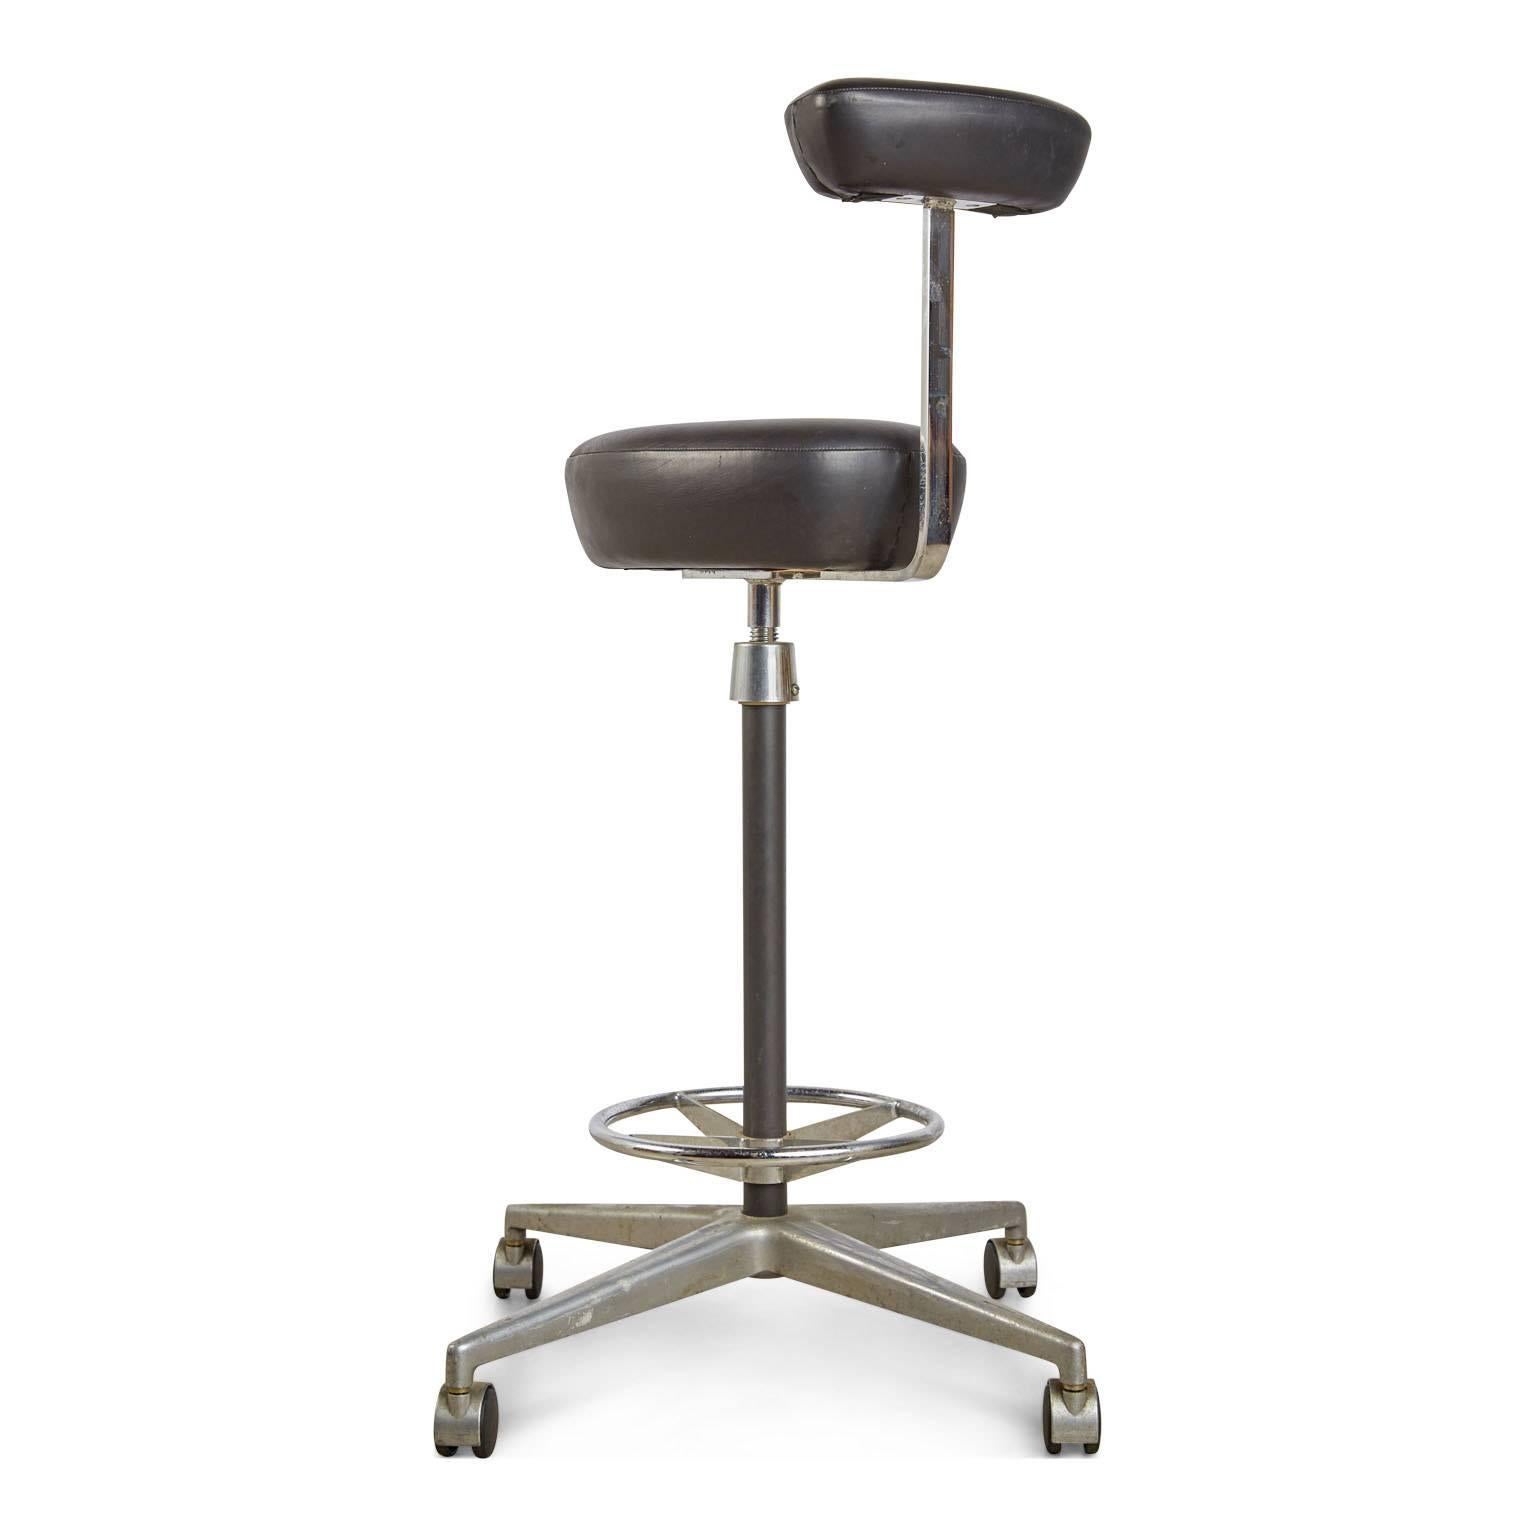 American George Nelson for Herman Miller Adjustable Height Drafting Stool, circa 1960